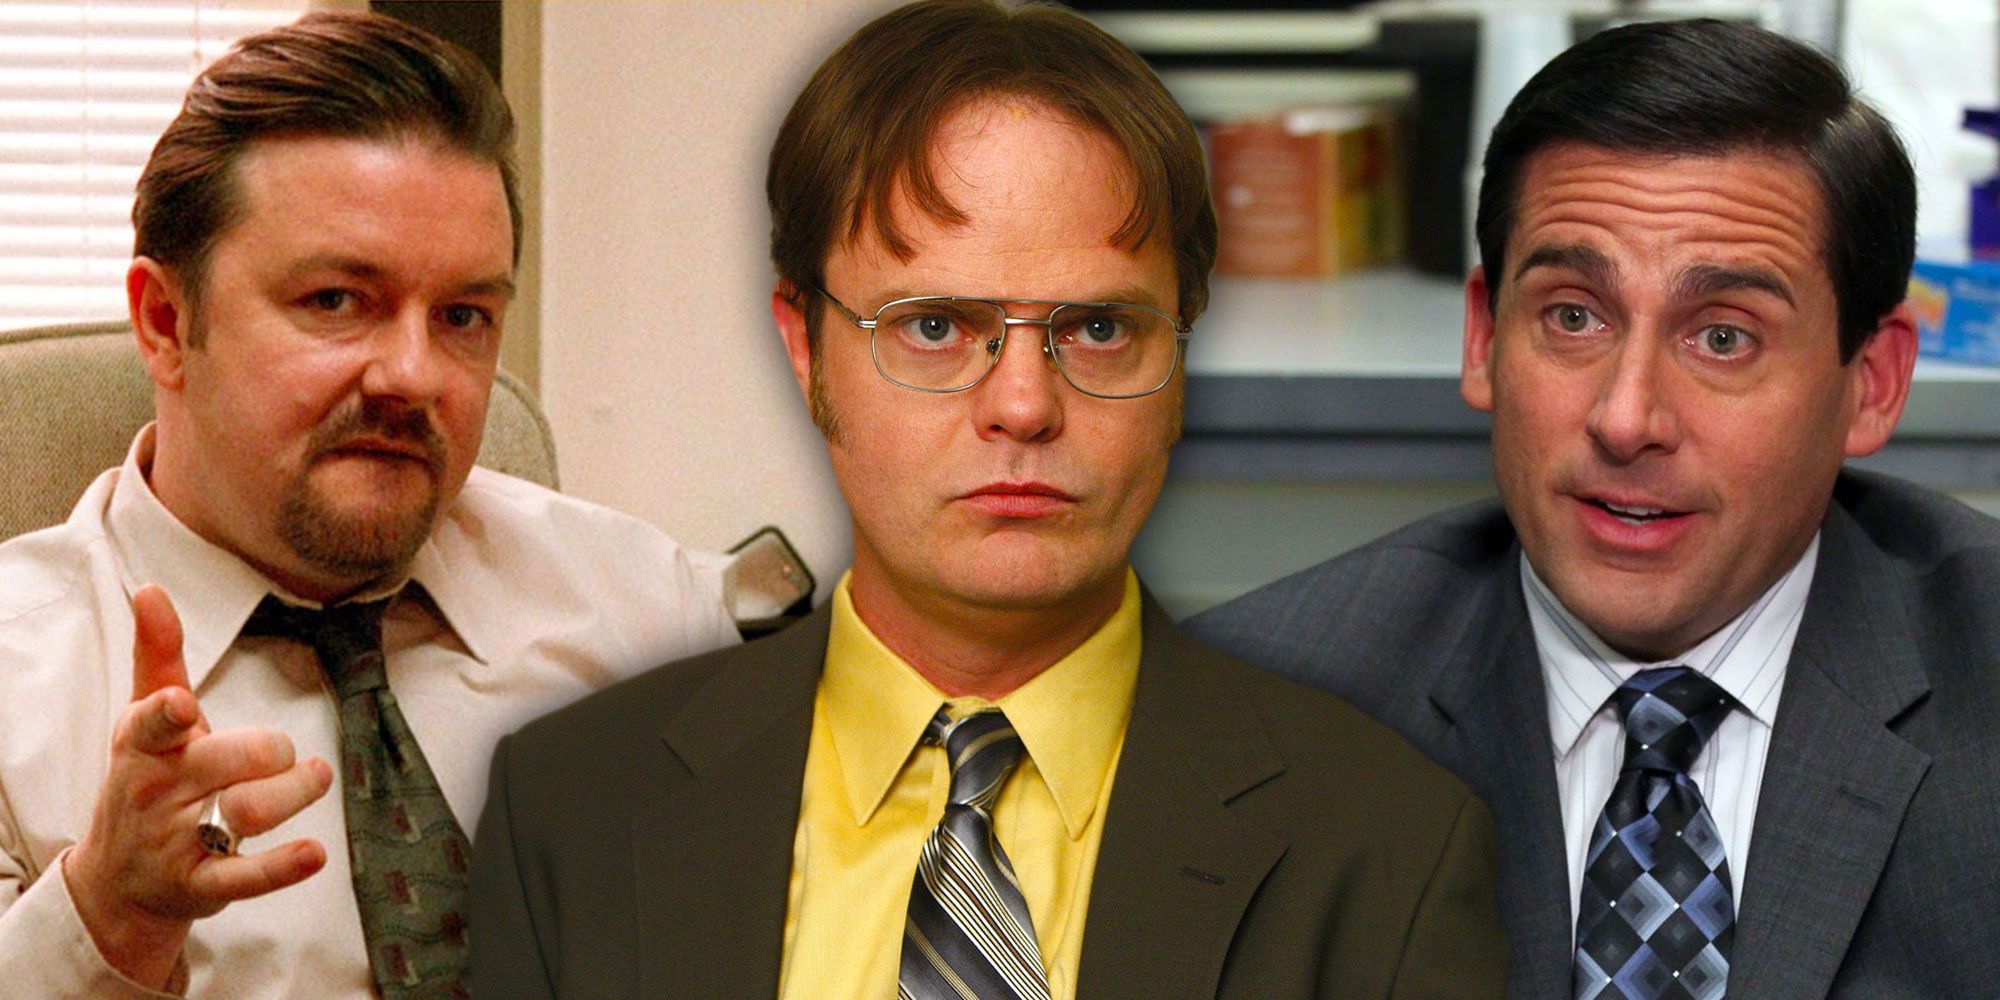 Three side by side images of characters from The Office US & UK